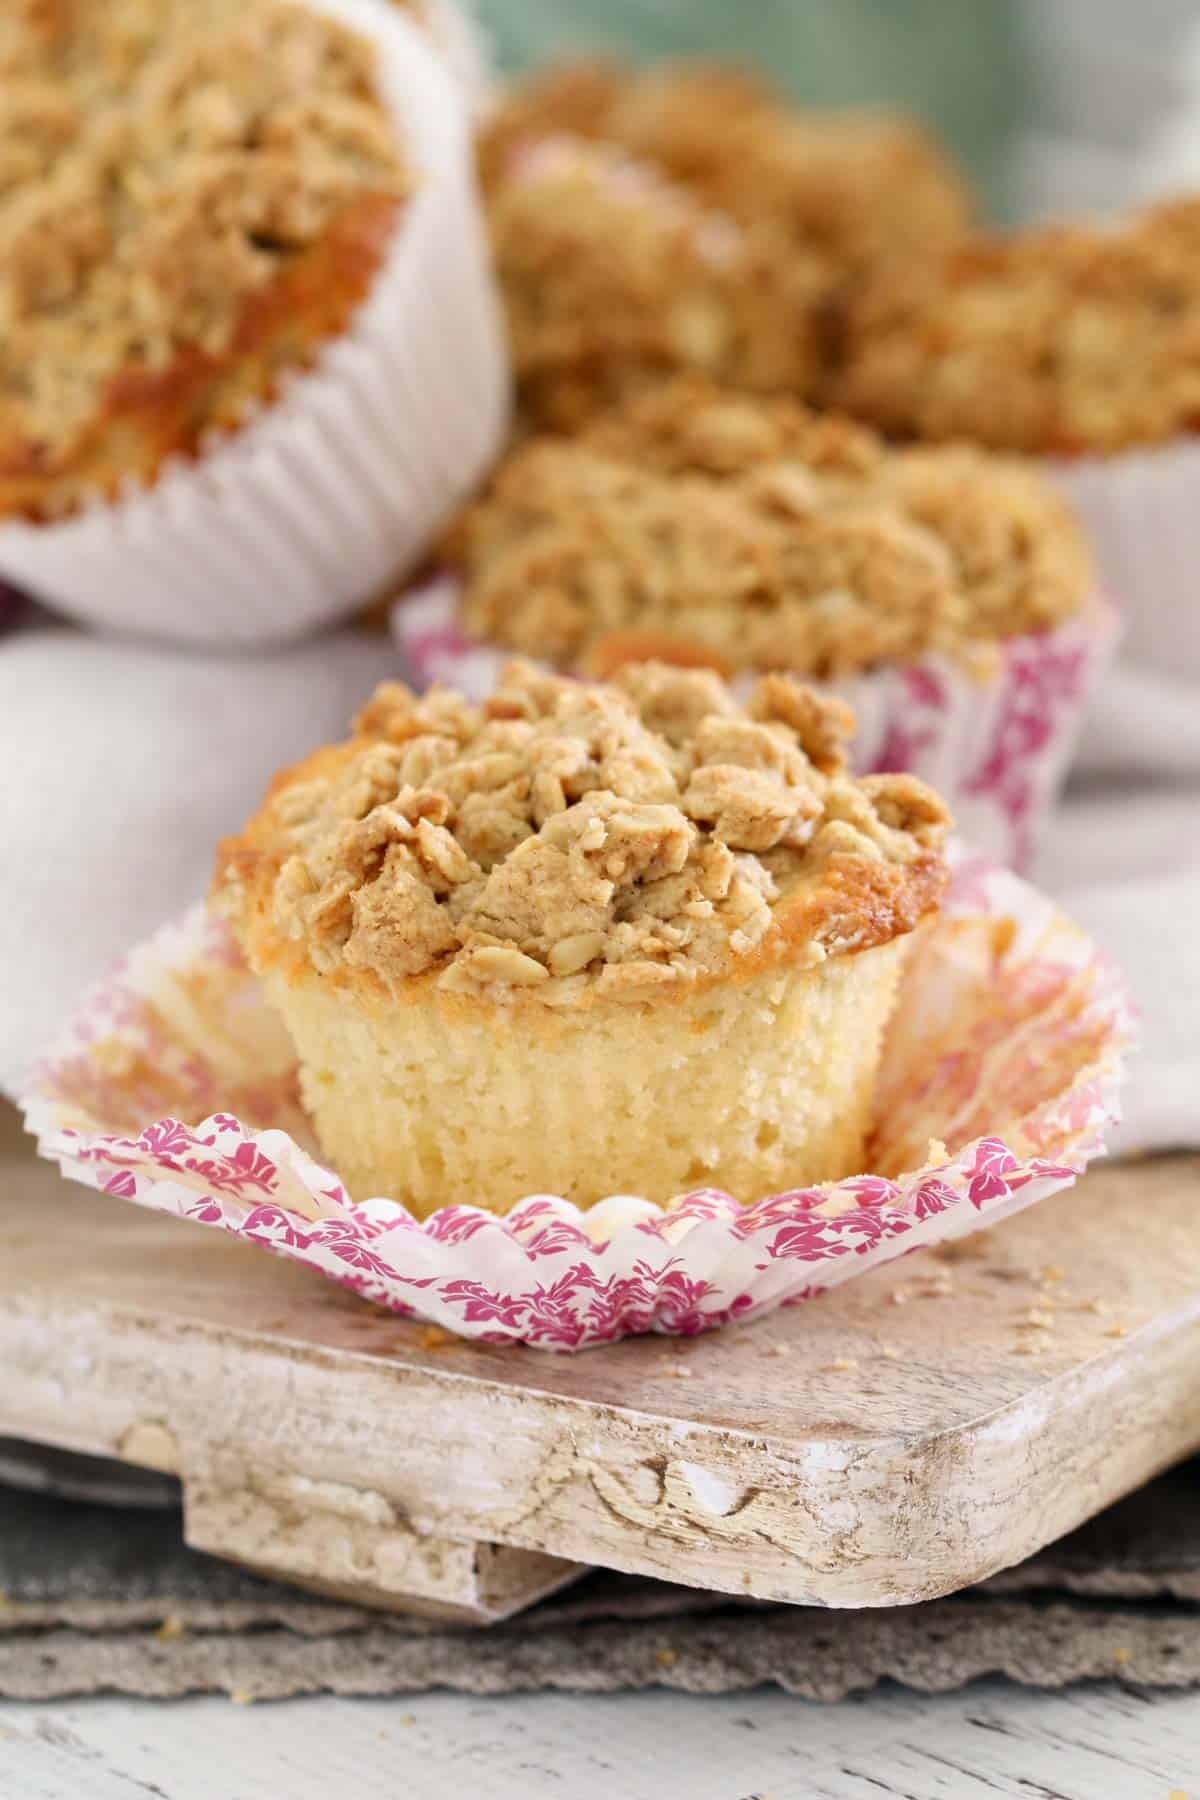 A muffin with a pink floral paper case opened on a wooden board.